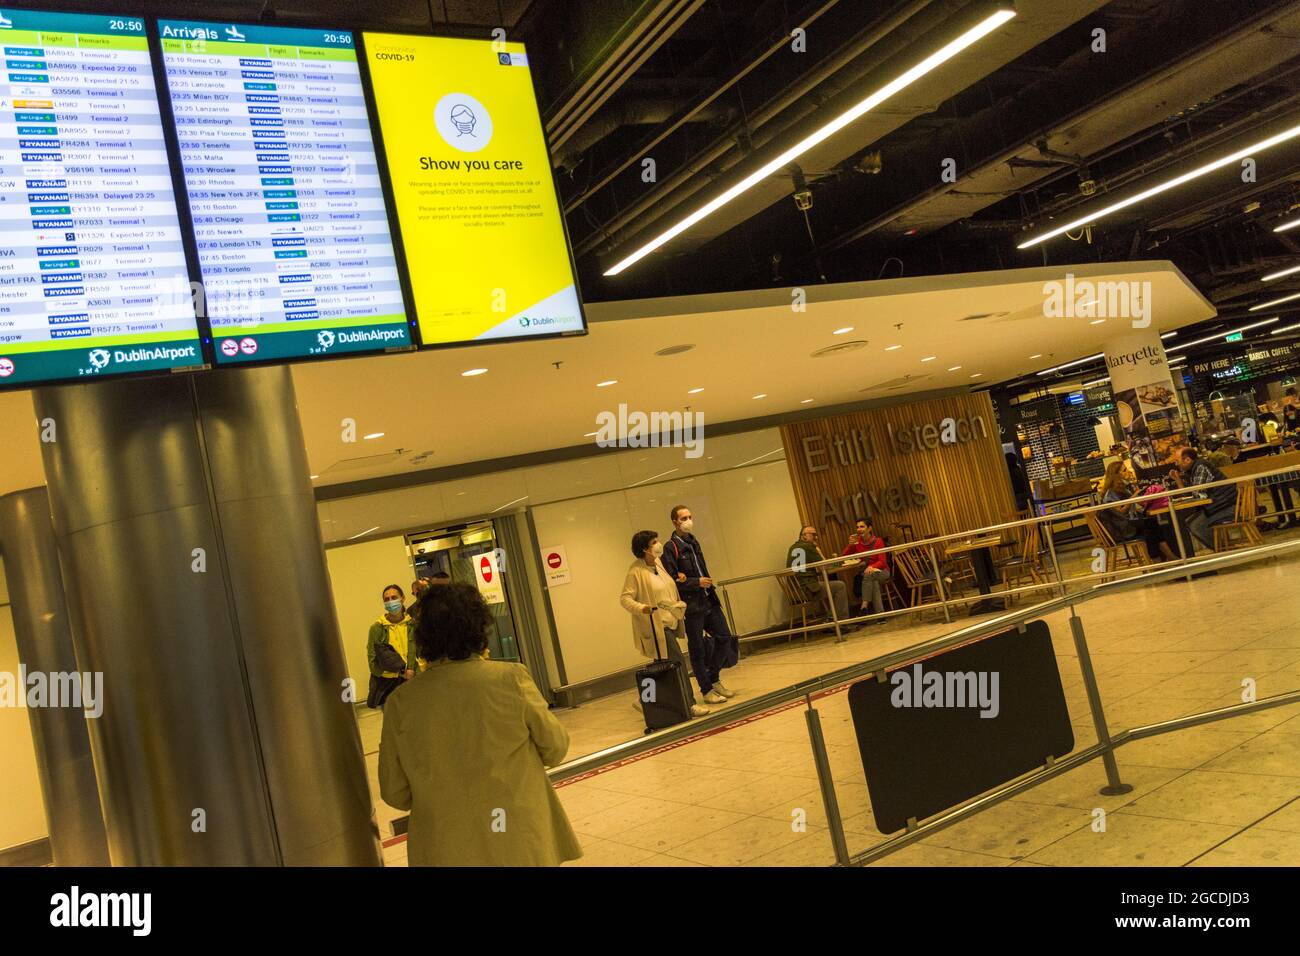 Passengers wearing masks arrive at Dublin Airport, Terminal One, during Covid19 pandemic, Ireland. Stock Photo